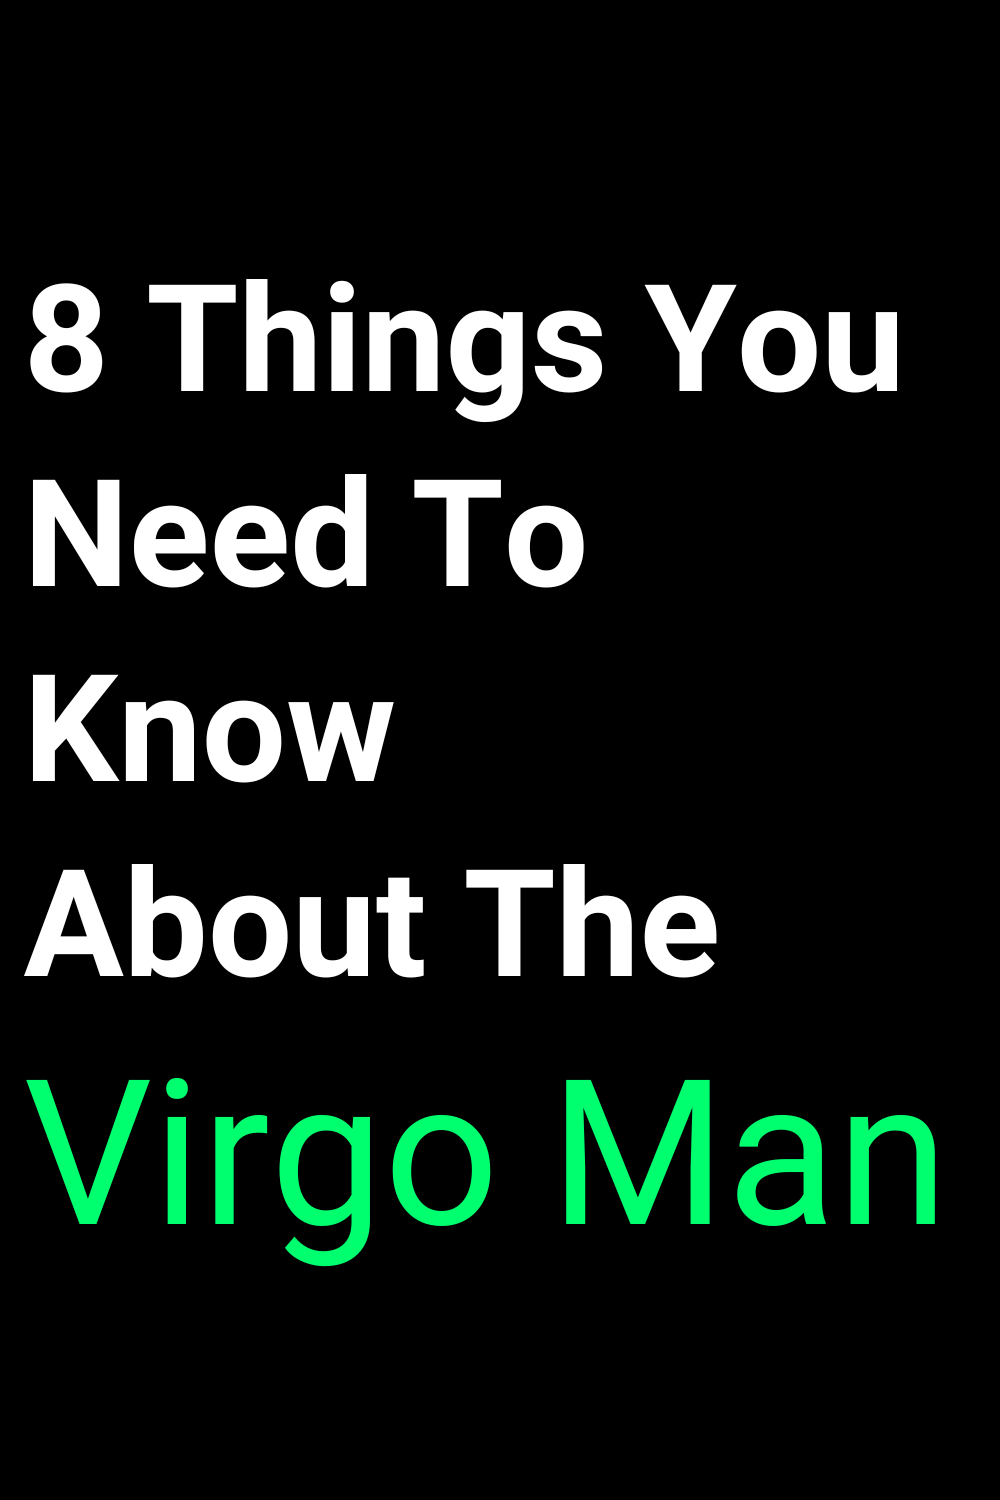 8 Things You Need To Know About The Virgo Man